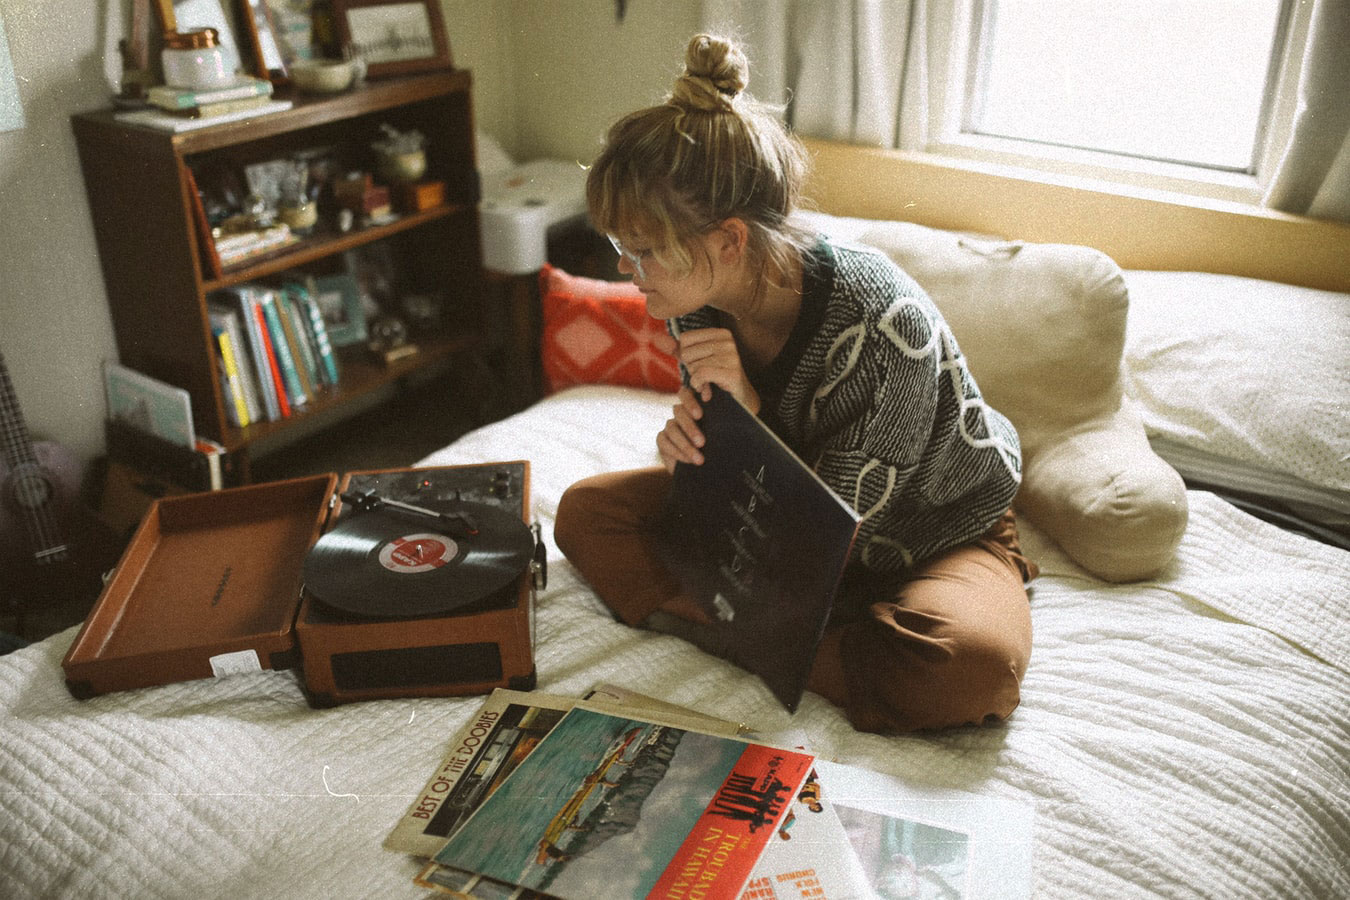 photo of a girl in her room listening to a record player | by aerosphotos @ unsplash.com